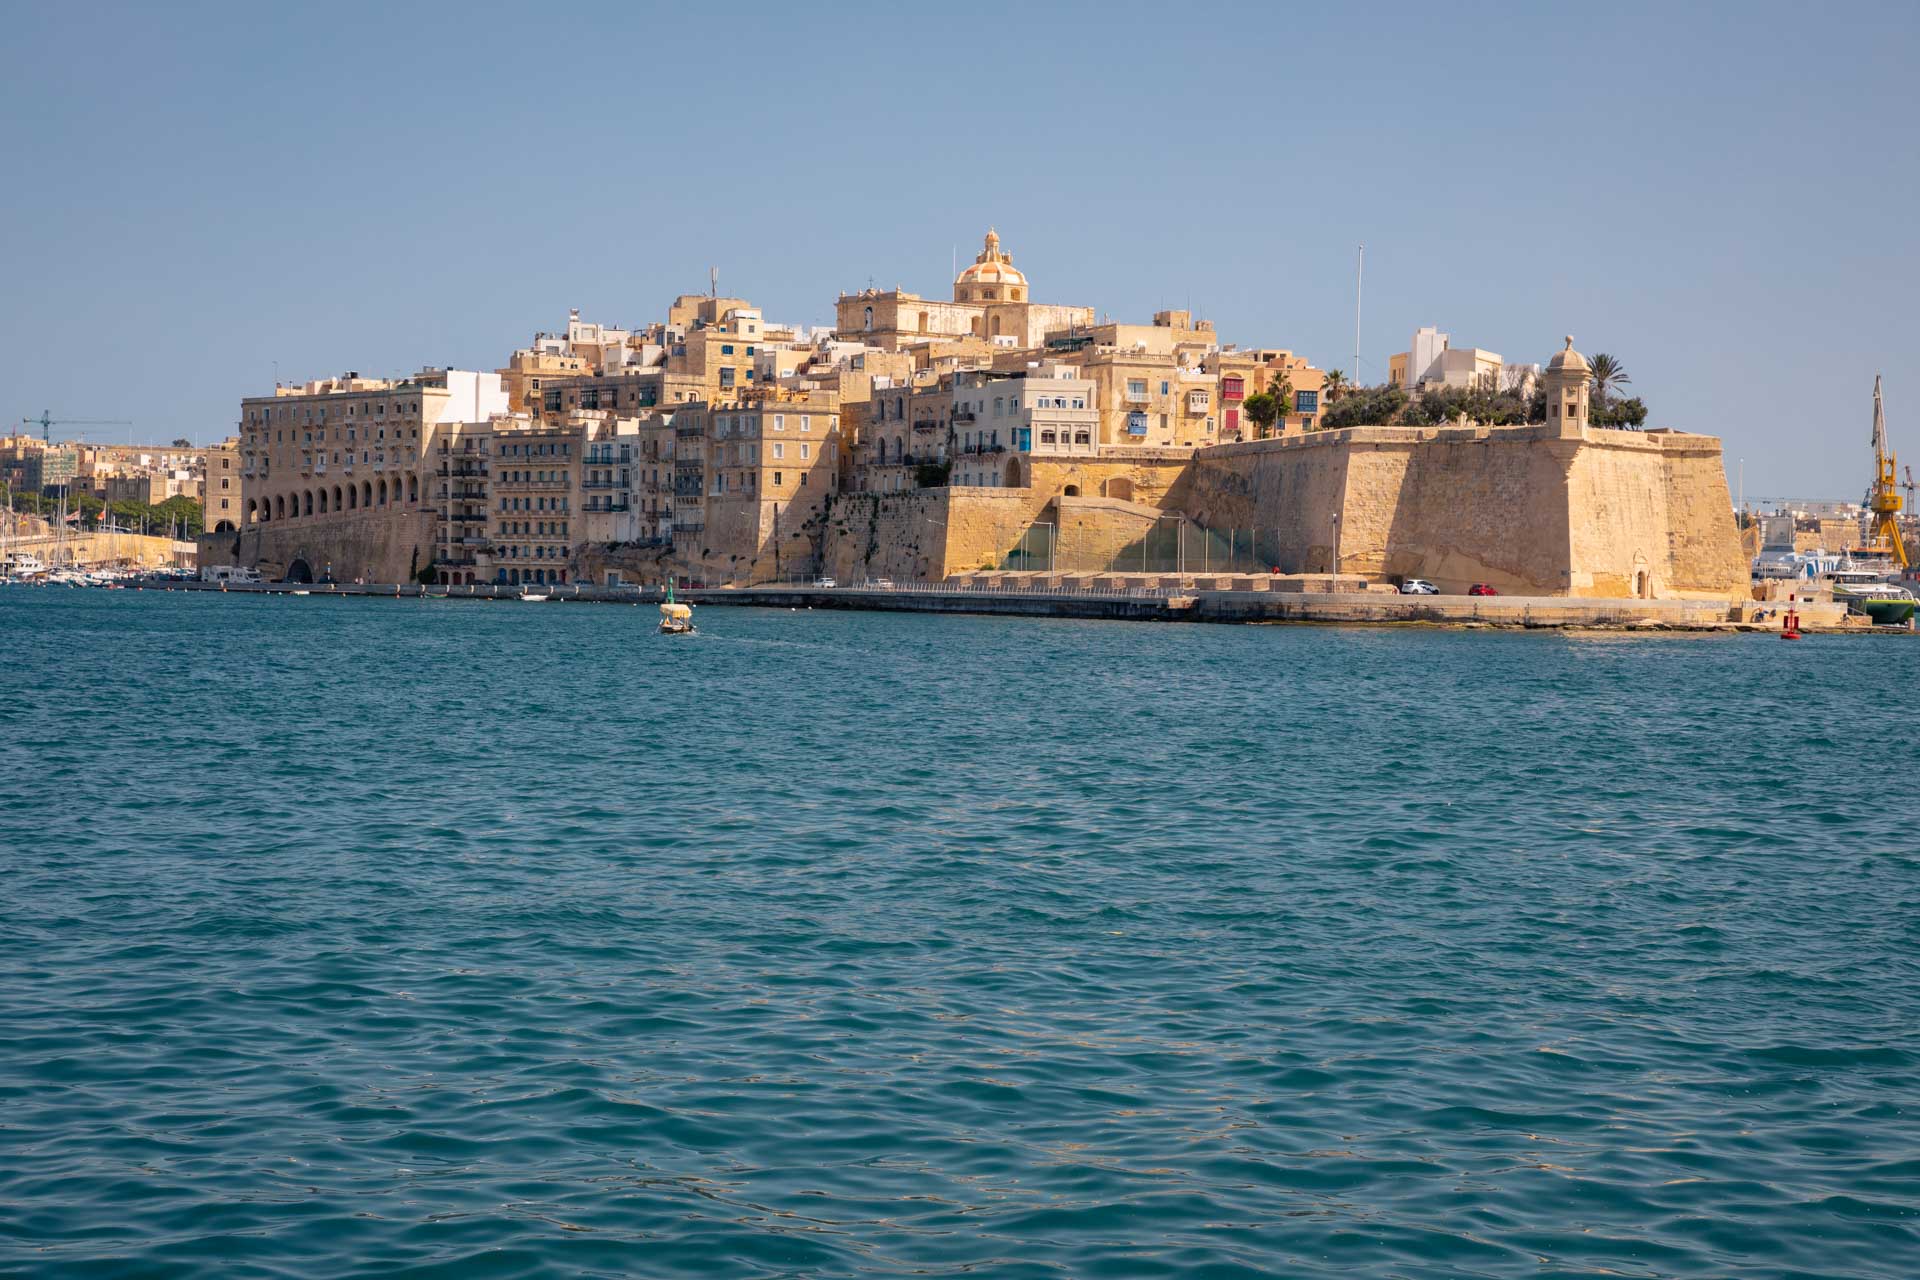 things to do in malta, places to visit in Malta, things to do on Malta, malta attractions, malta tourist attractions, best places to visit in malta, activities in malta